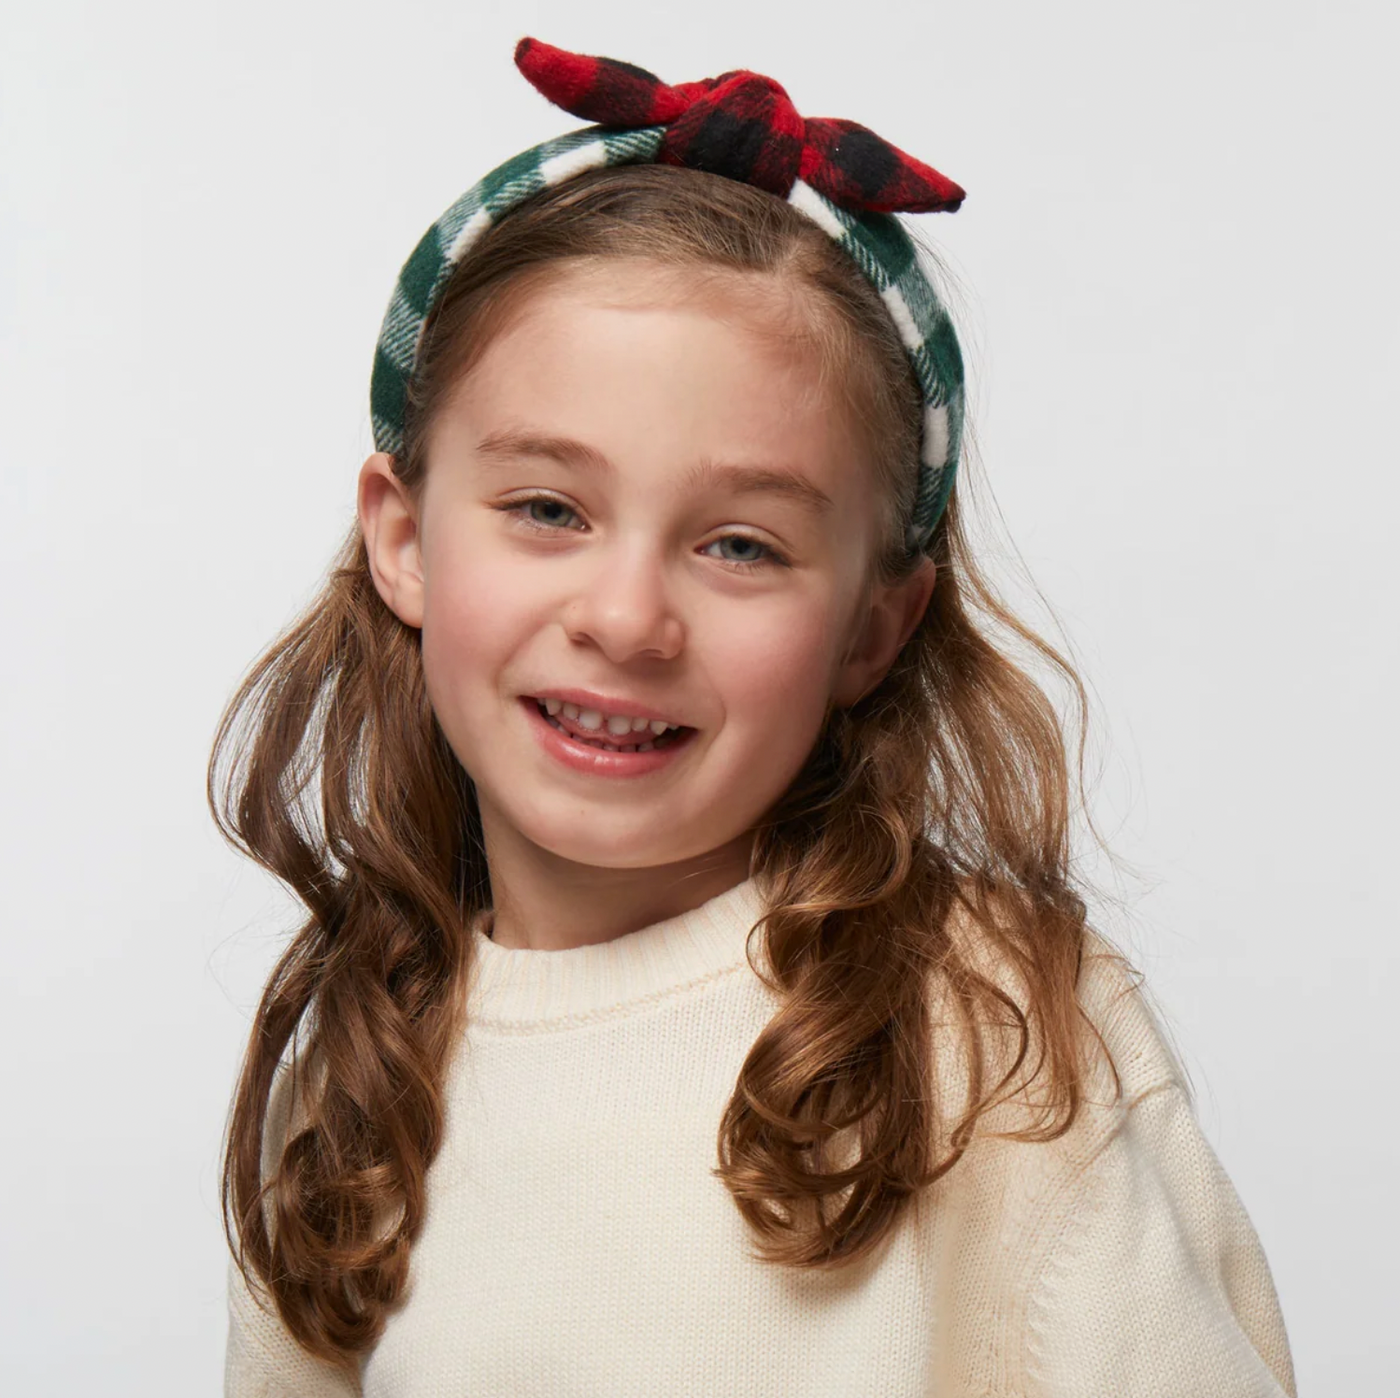 PEPPERMINT KIDS MIXED FLANNEL BOW TIE HEADBAND